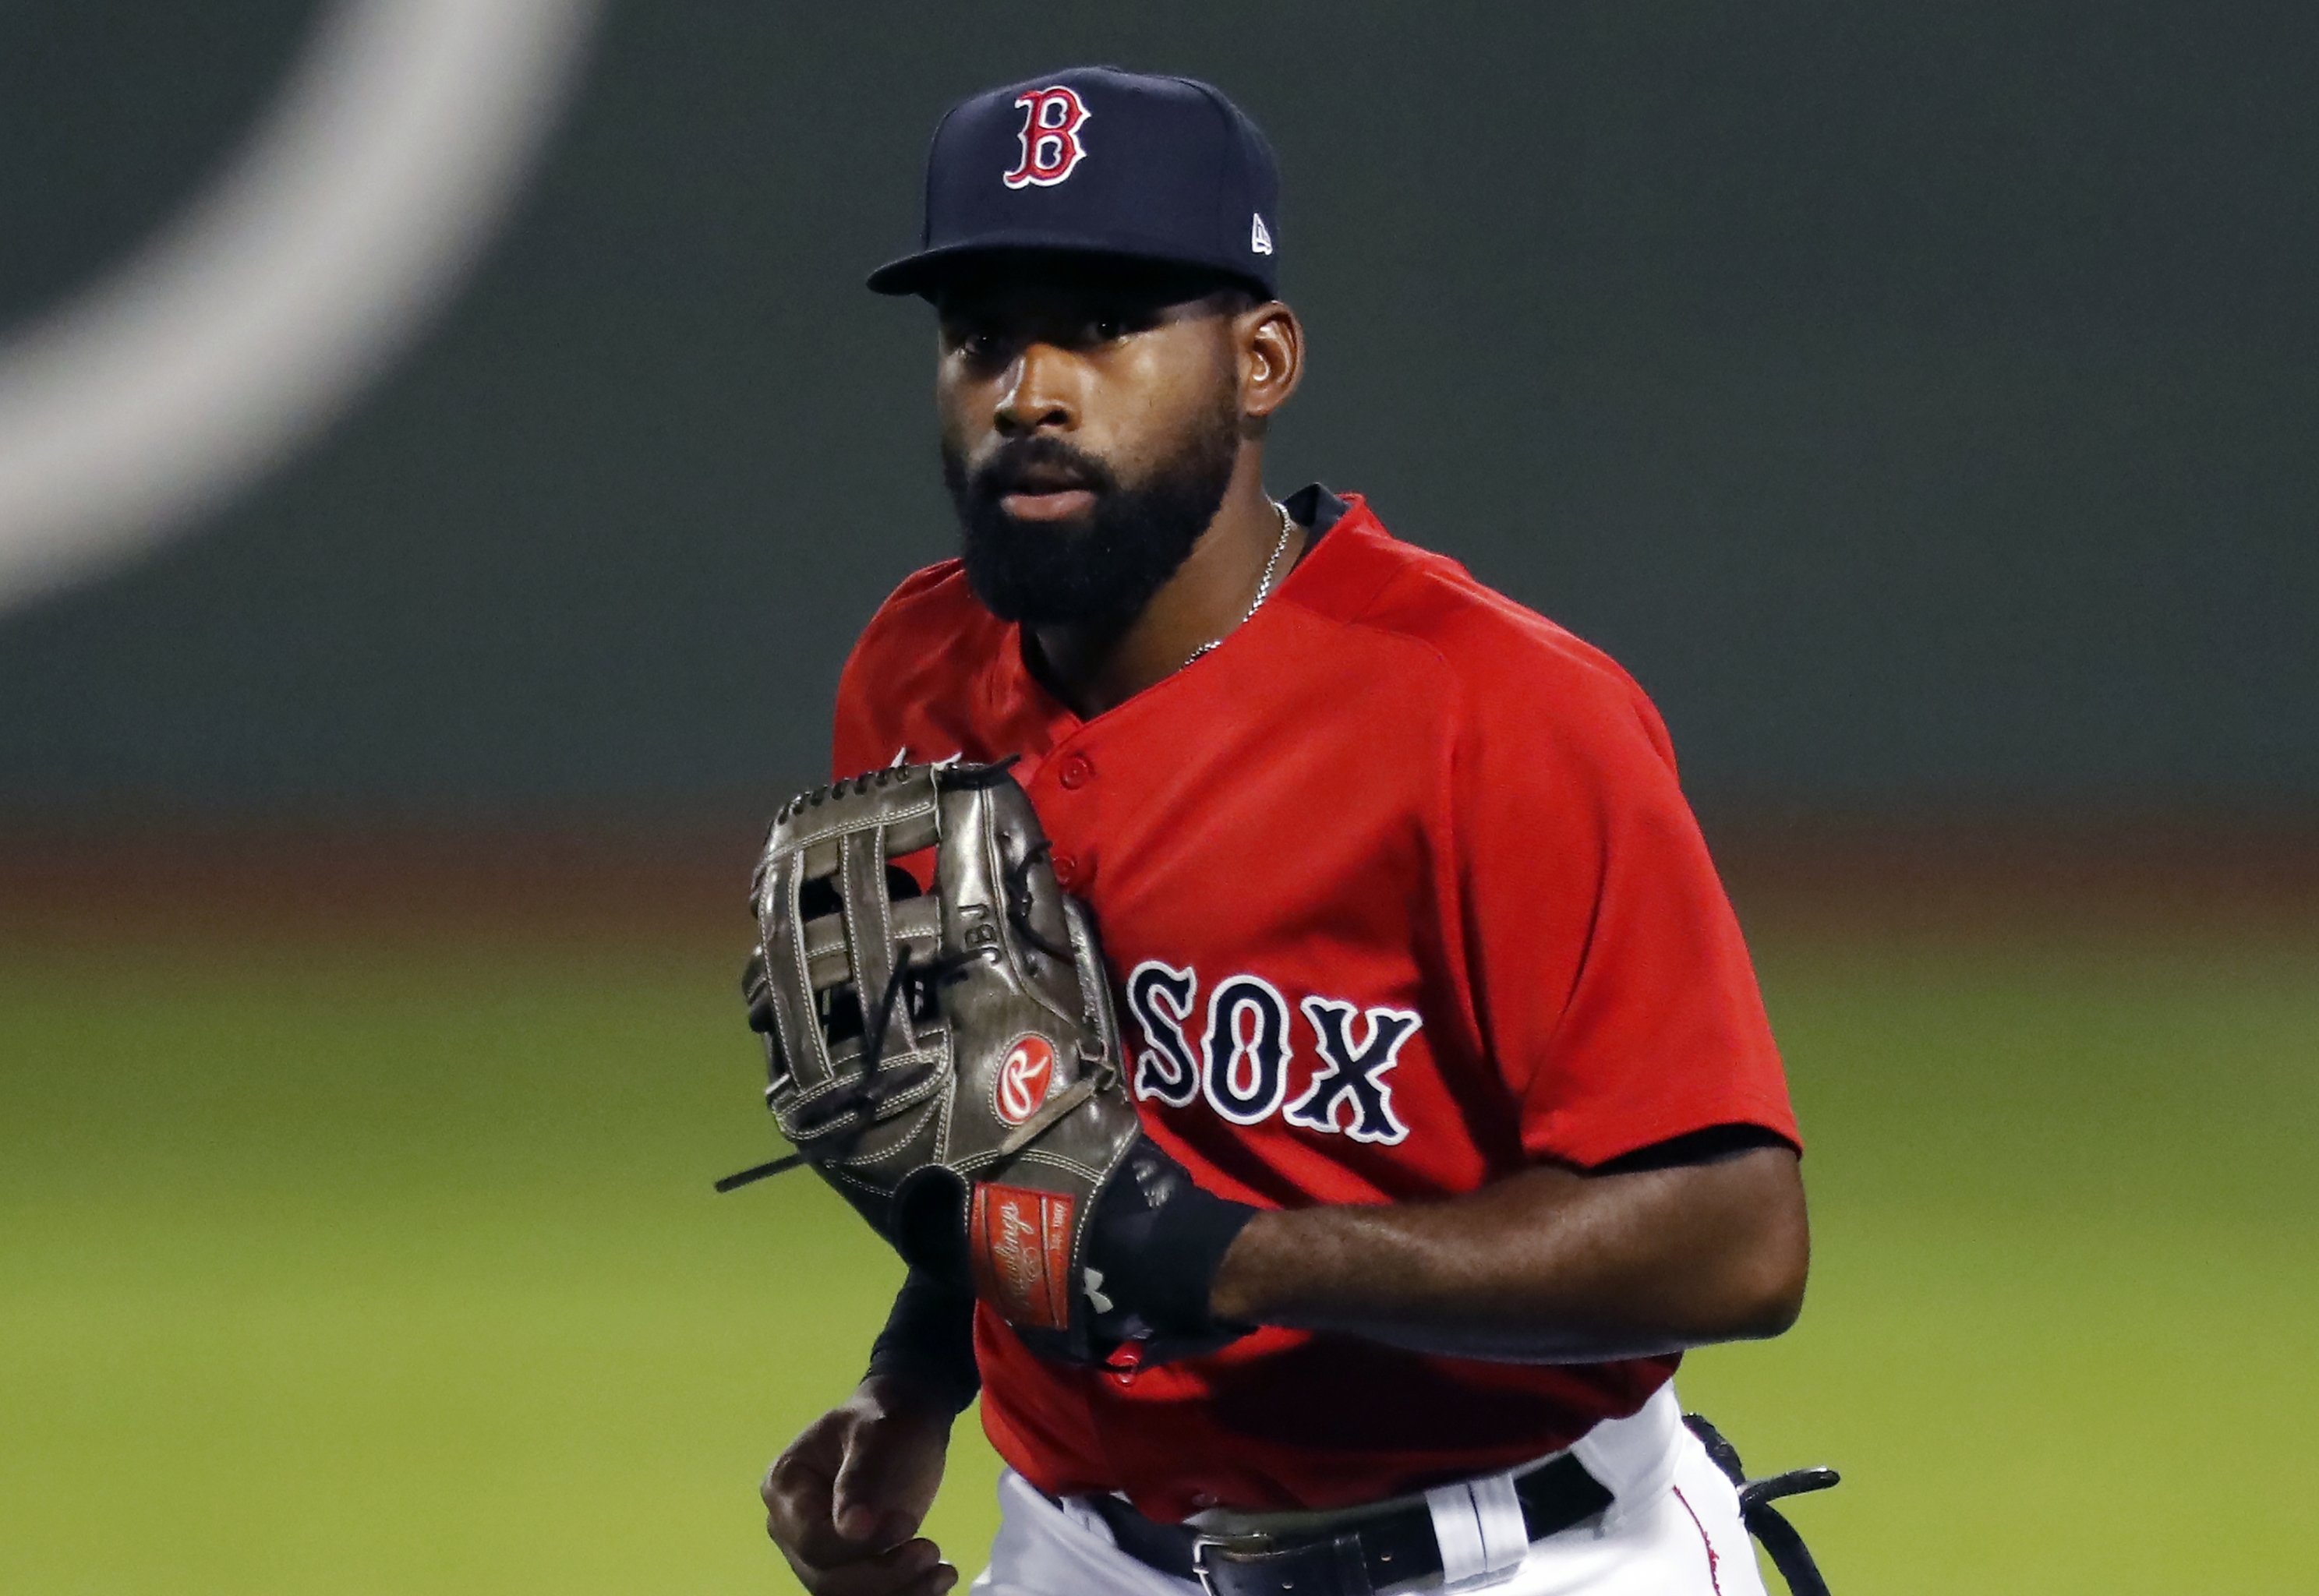 Blue Jays sign Jackie Bradley Jr., adding outfield depth for playoff push